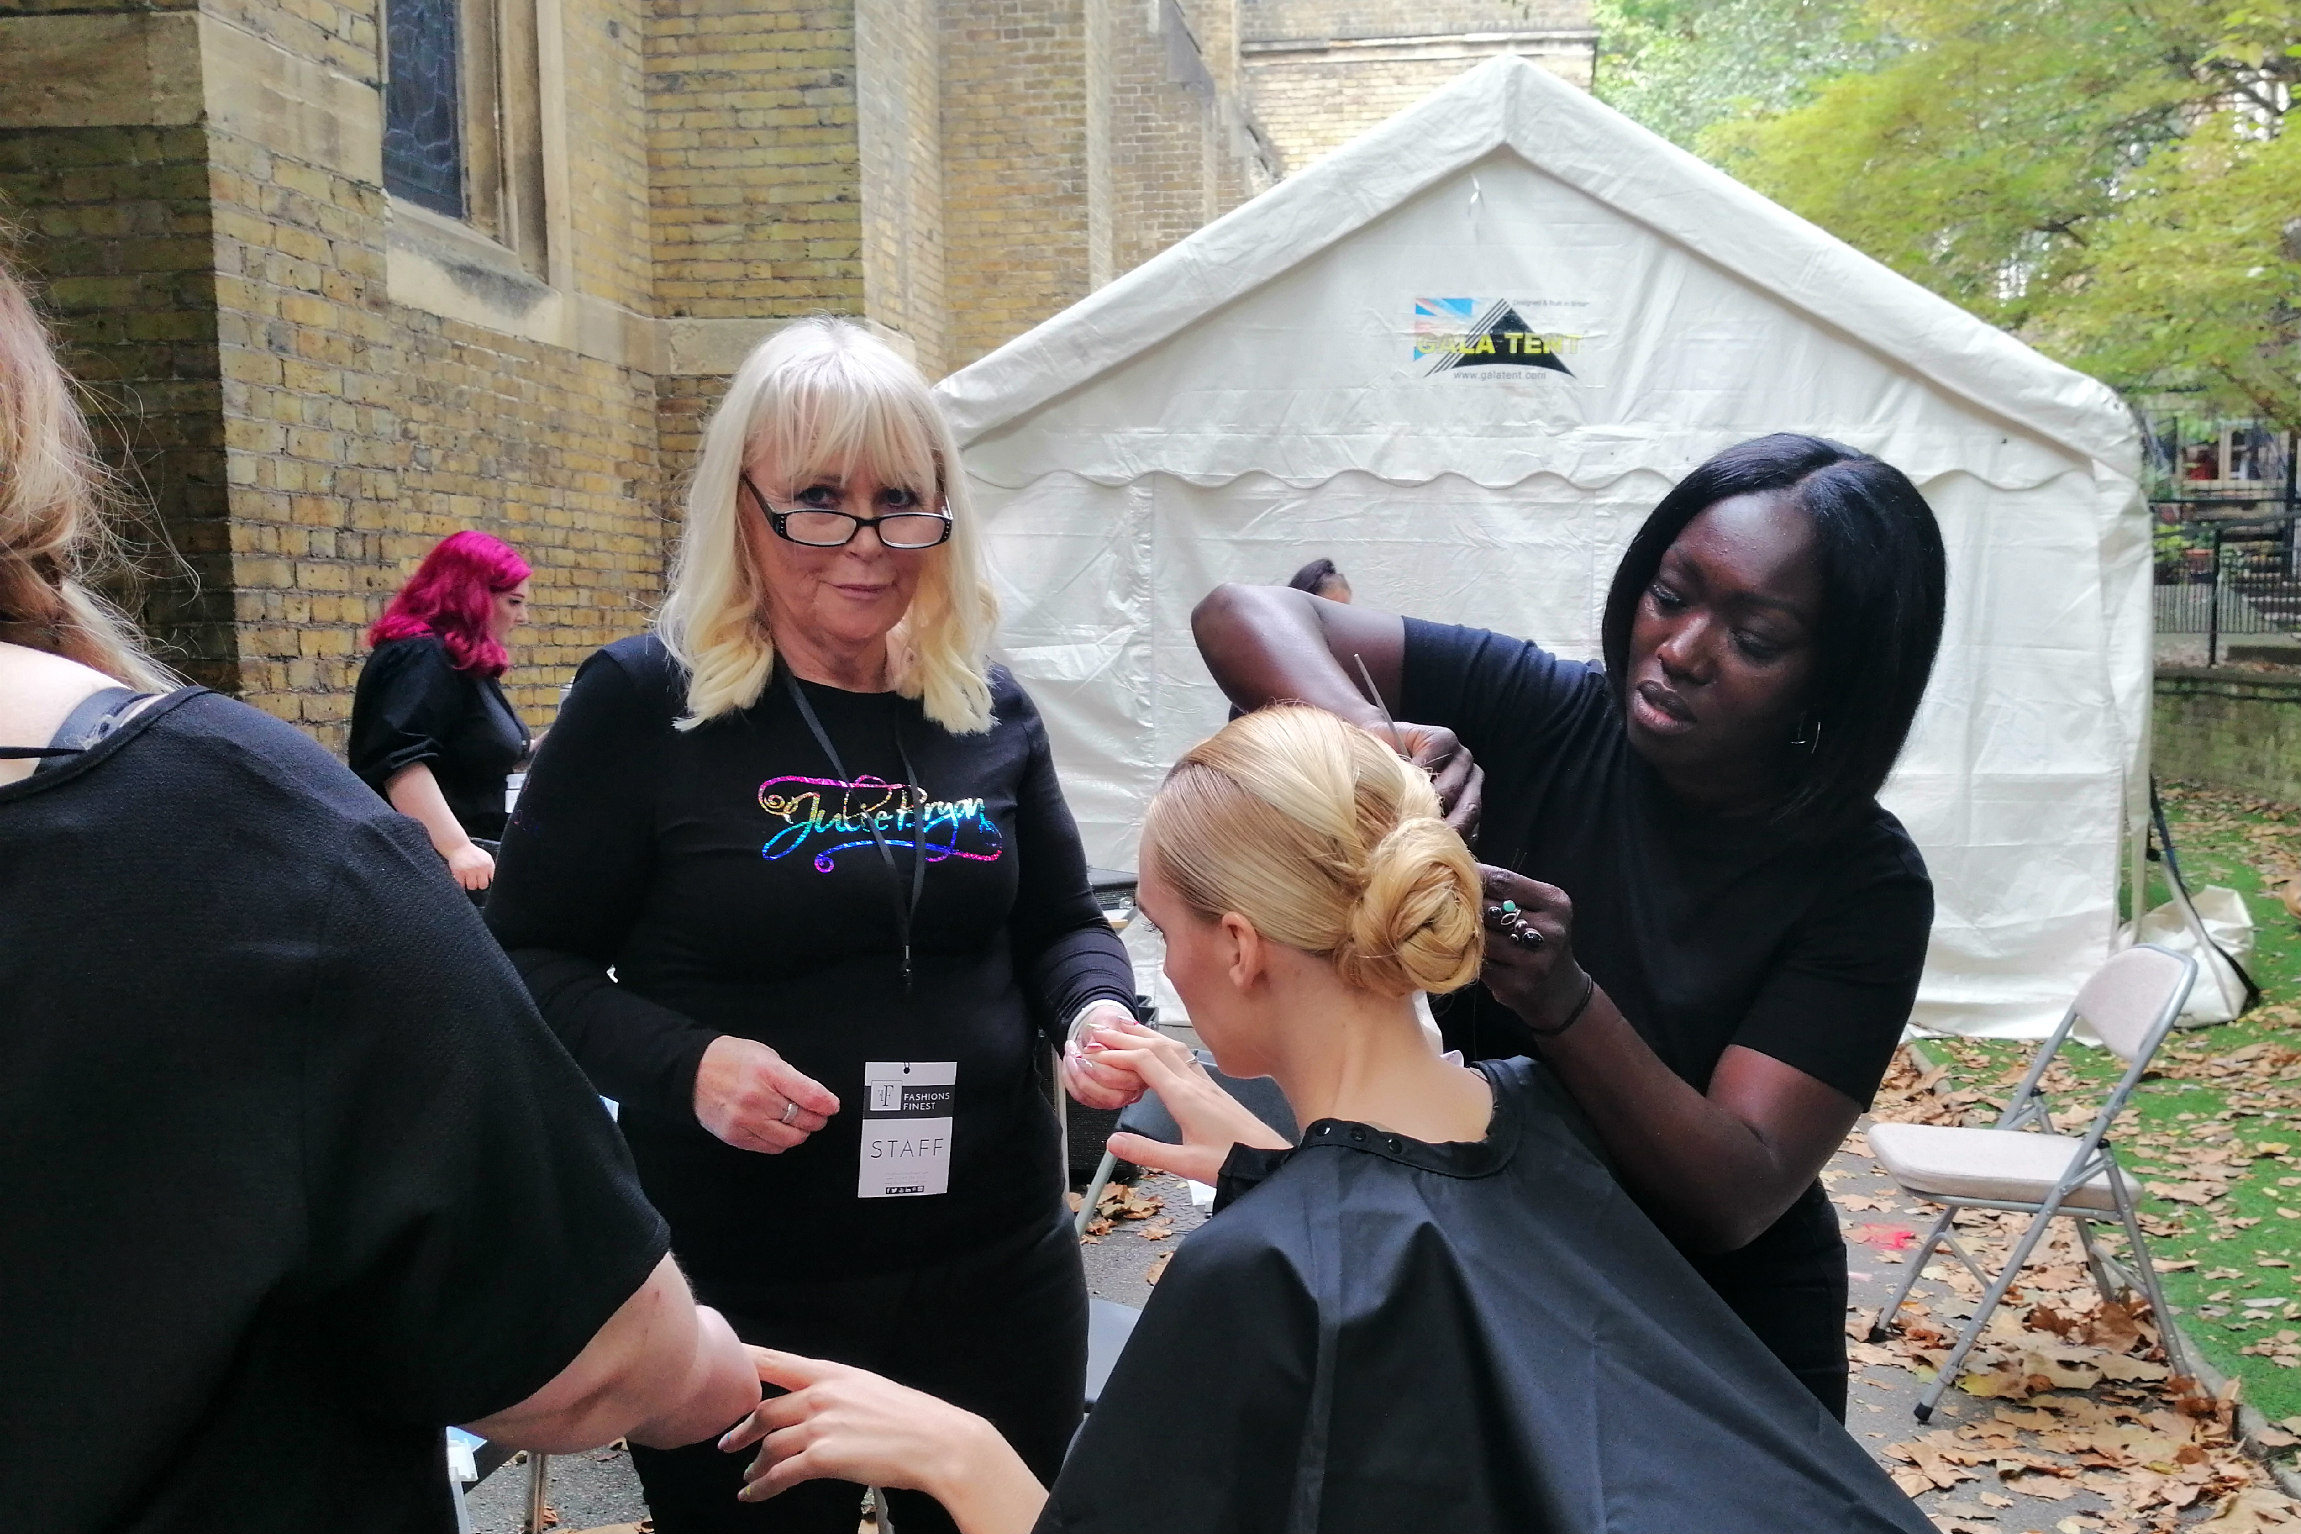 Fashions Finest LFW behind the scene latest beauty trends. AW21 hairstyle trends. Amy Tasker & team. Ph. Valentina Chirico